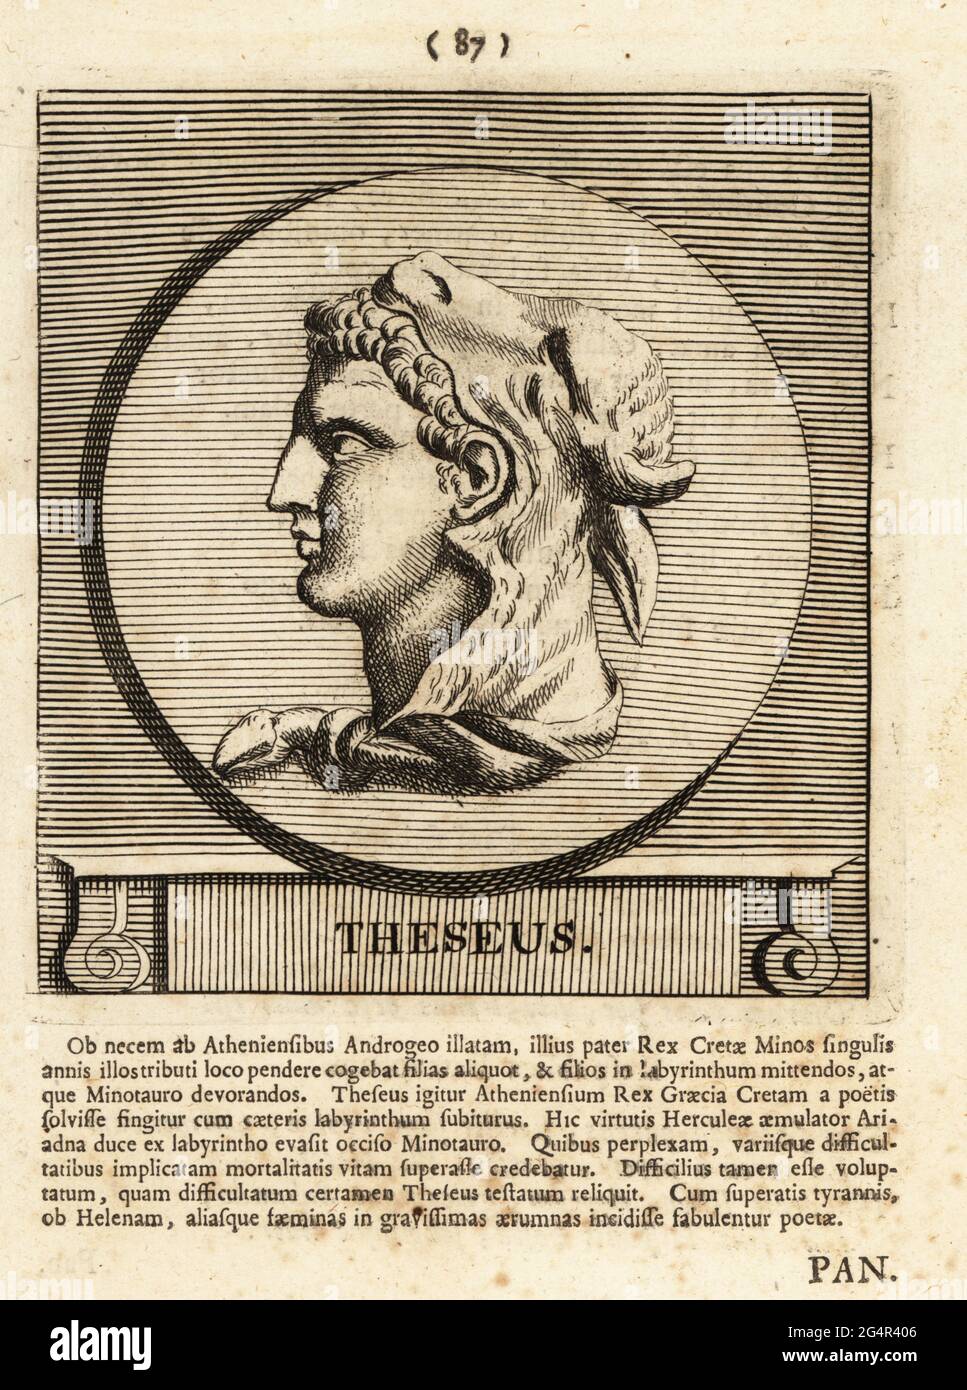 Theseus, mythical king and founder-hero of Athens. Son of Aegeus, King of Athens (or of the god Poseidon) and mother Aethra.. He is wearing a bull's head and horns as a hood. Copperplate engraving by Pieter Bodart (1676-1712) from Henricus Spoor’s Deorum et Heroum, Virorum et Mulierum Illustrium Imagines Antiquae Illustatae, Gods and Heroes, Men and Women, Illustrated with Antique Images, Petrum, Amsterdam, 1715. First published as Favissæ utriusque antiquitatis tam Romanæ quam Græcæ in 1707. Henricus Spoor was a Dutch physician, classical scholar, poet and writer, fl. 1694-1716. Stock Photo